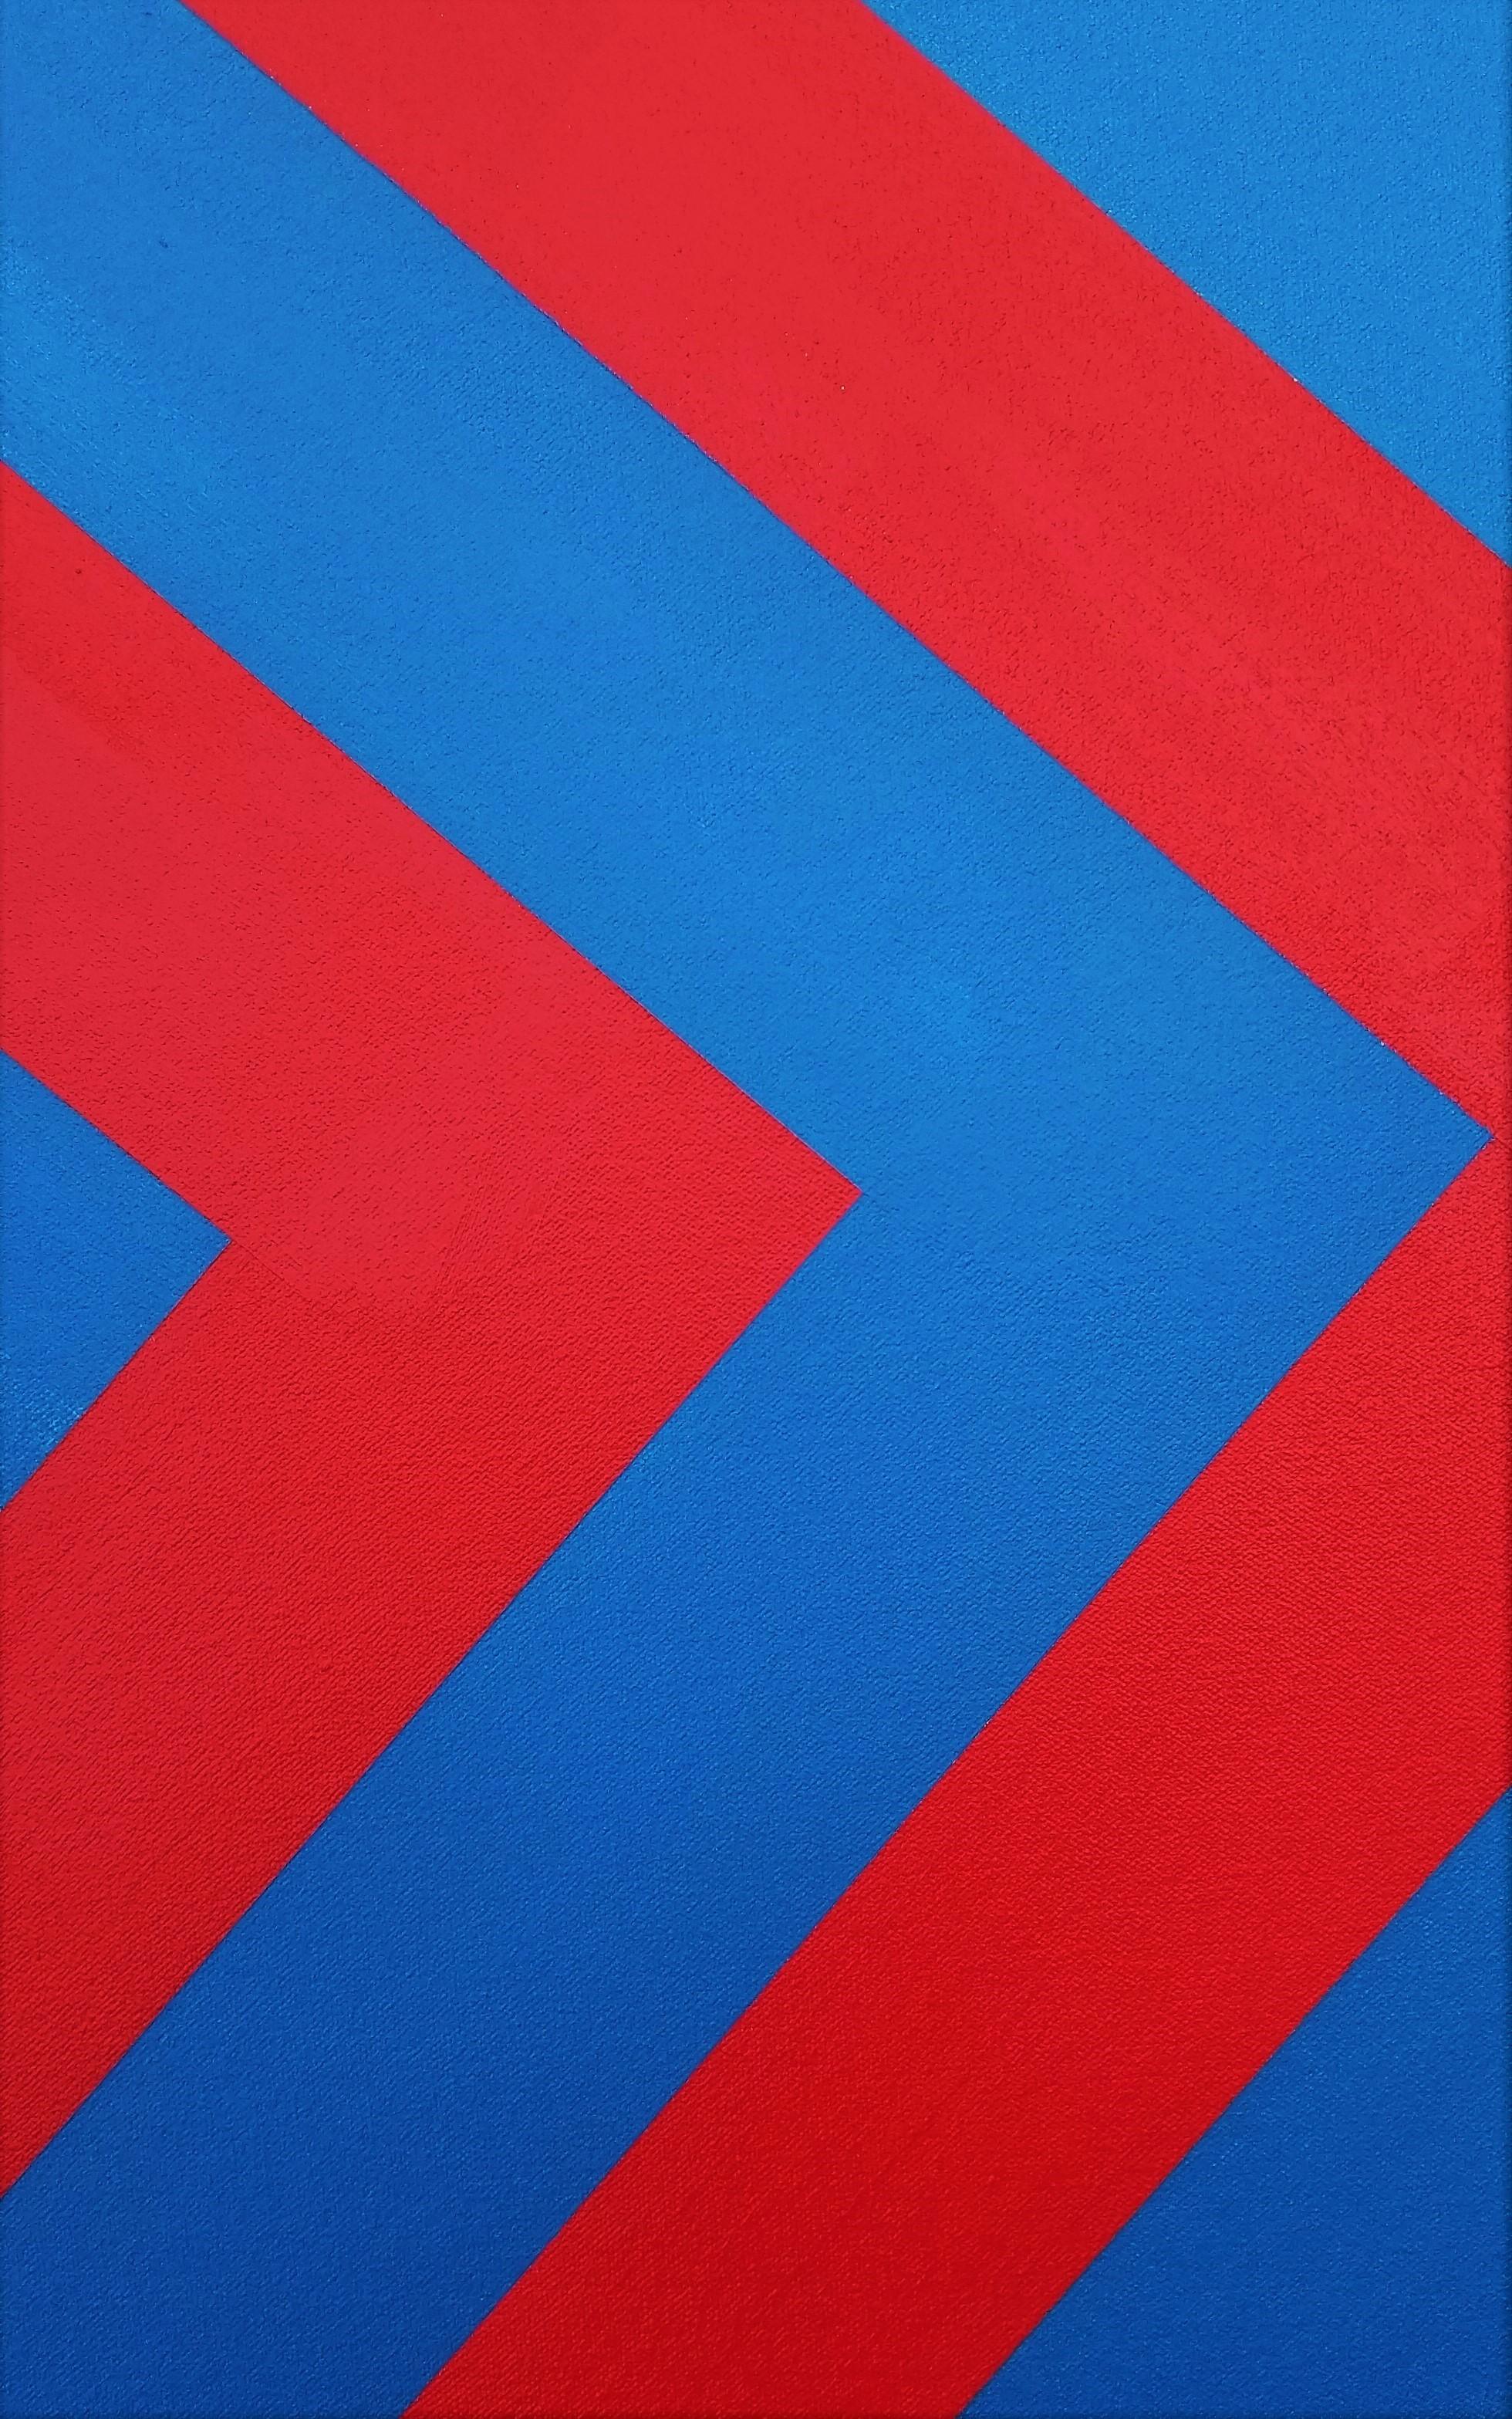 Diamond XLV /// Contemporary Abstract Geometric Striped Blue Red White Painting For Sale 6